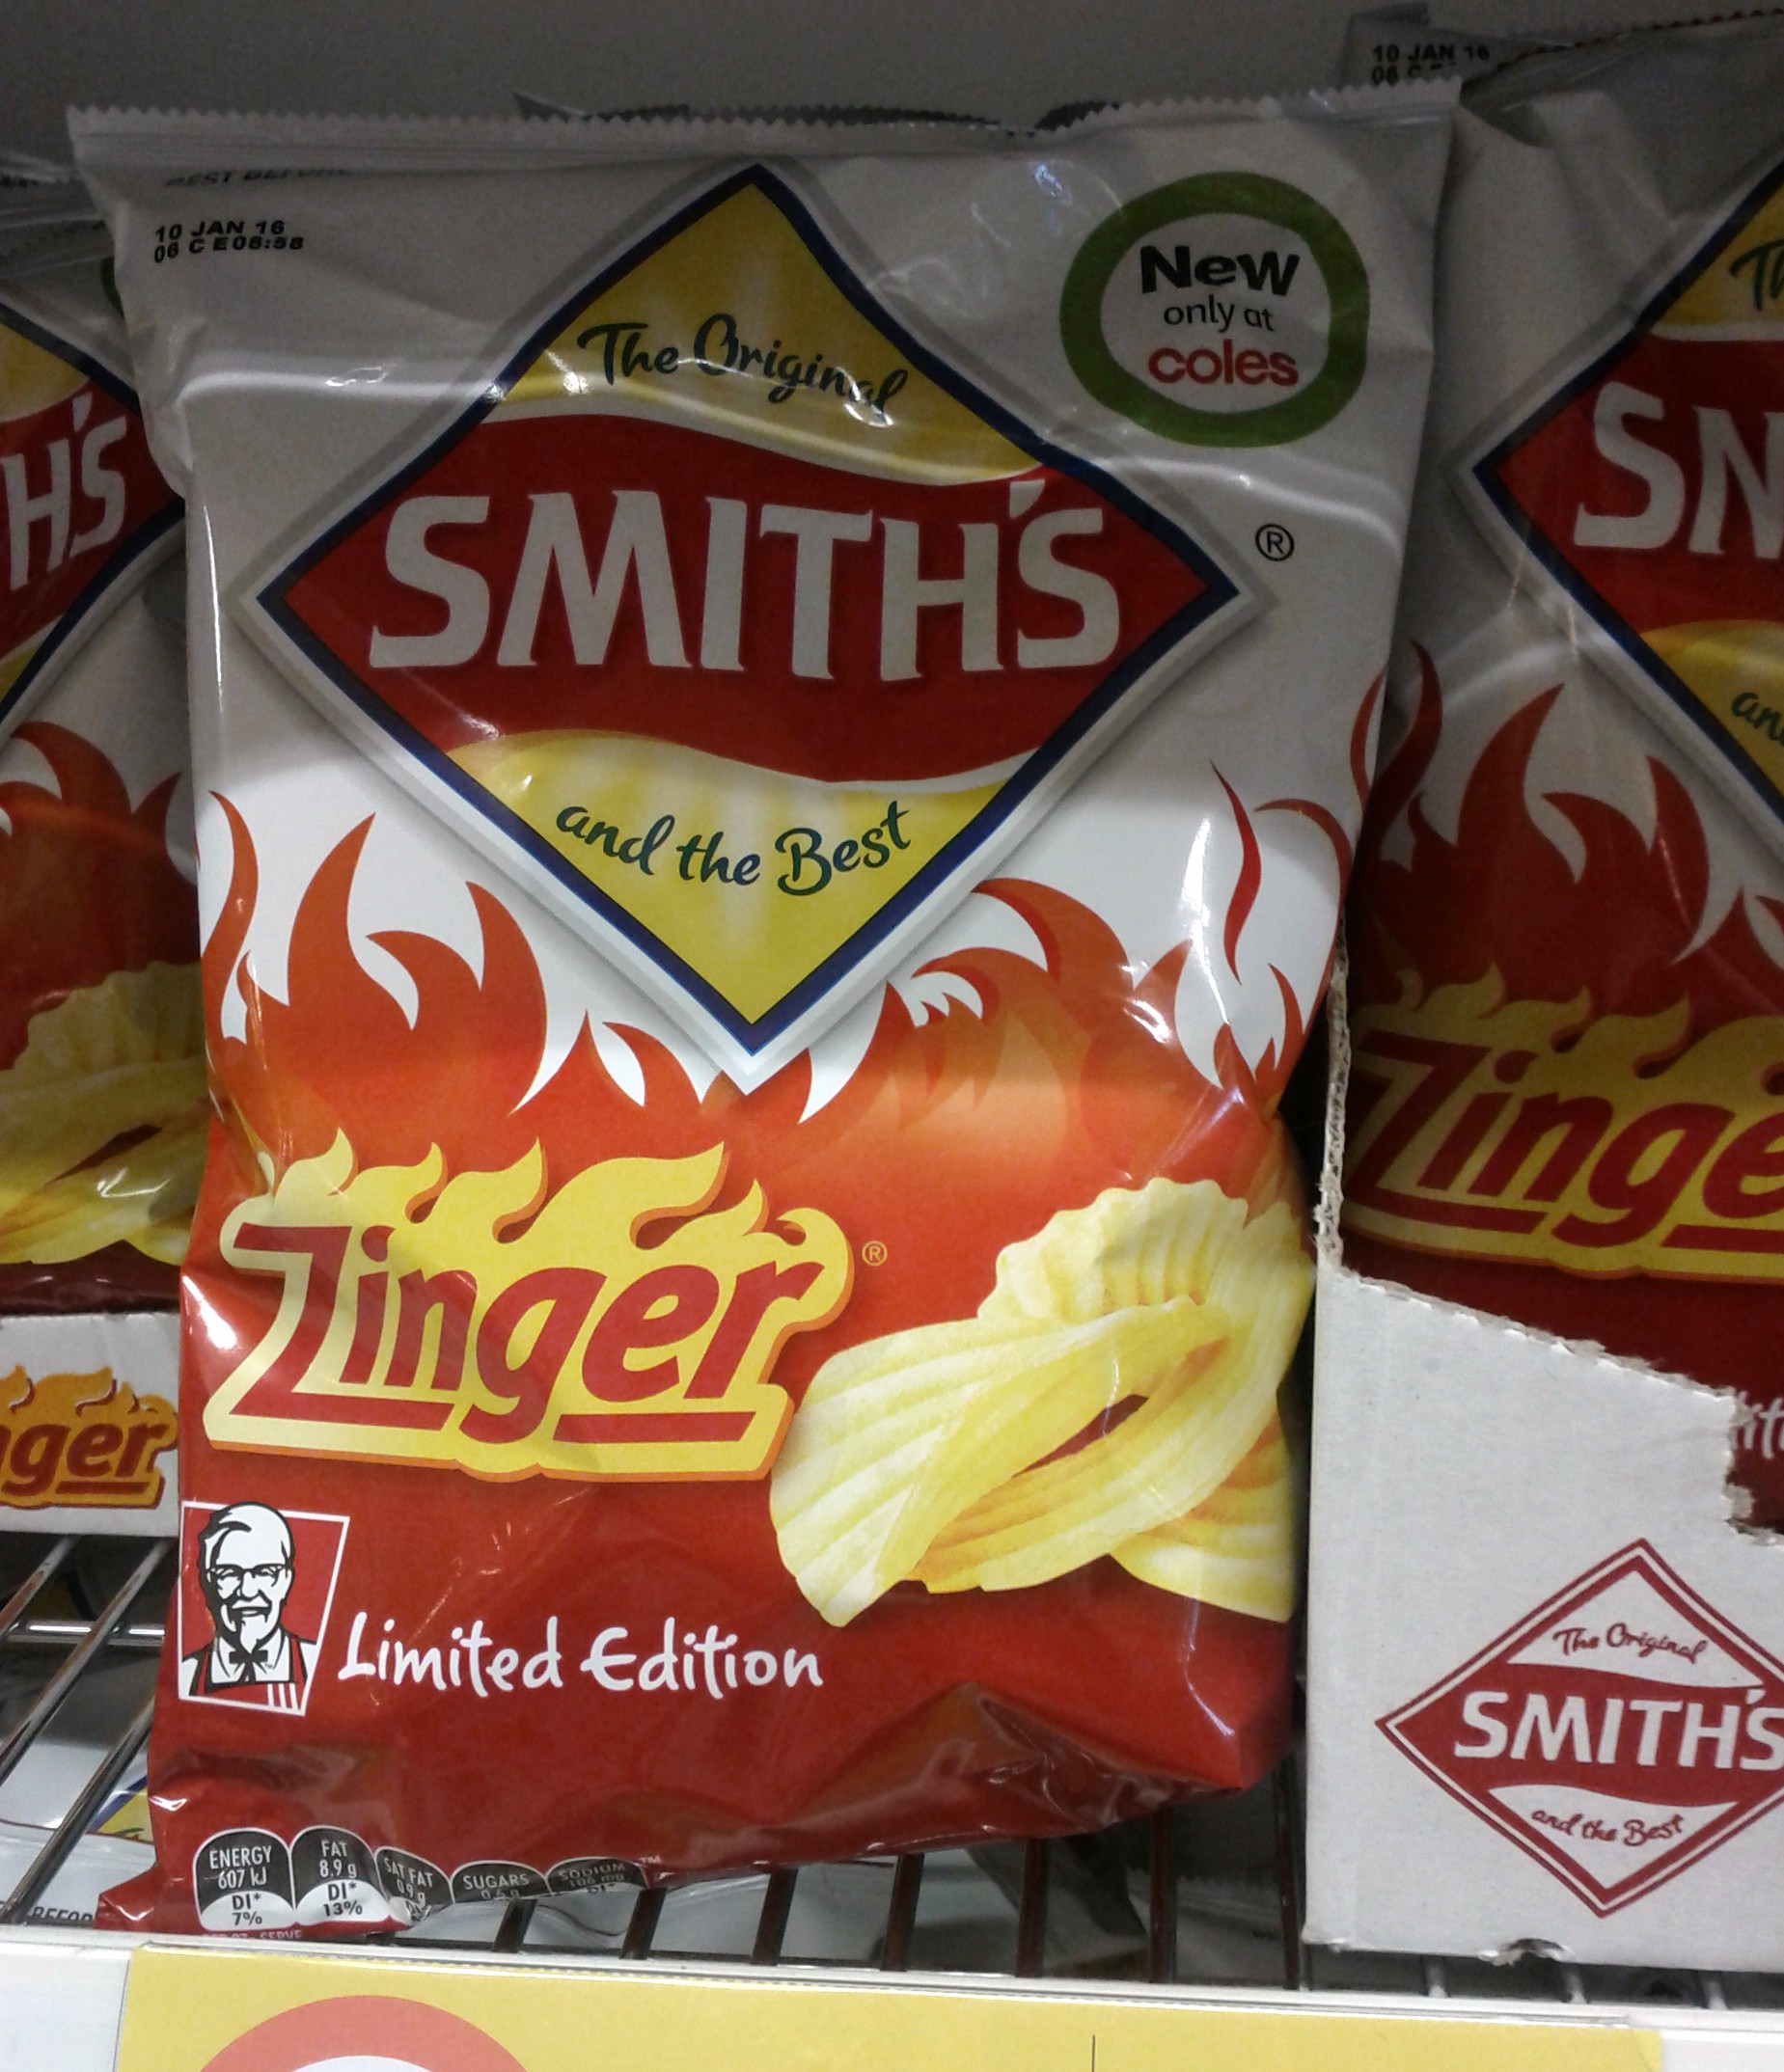 Smith's Zinger Limited Edition